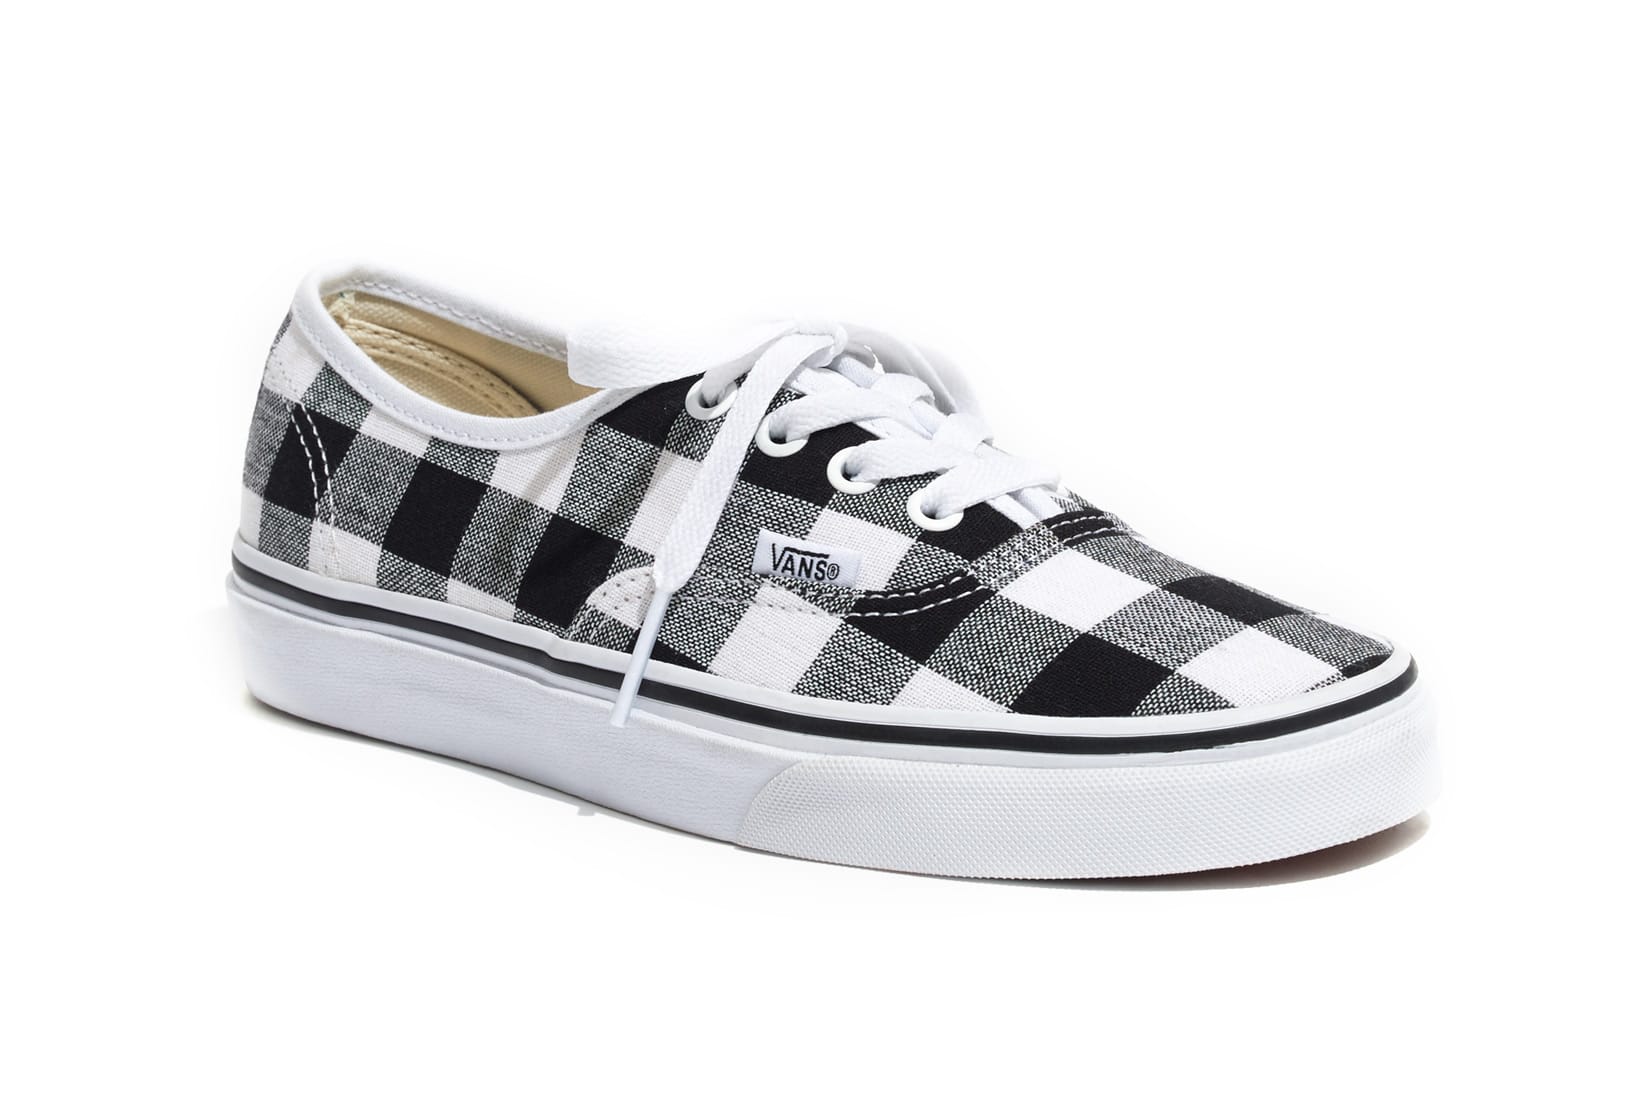 Madewell x Vans Gingham Authentic is 